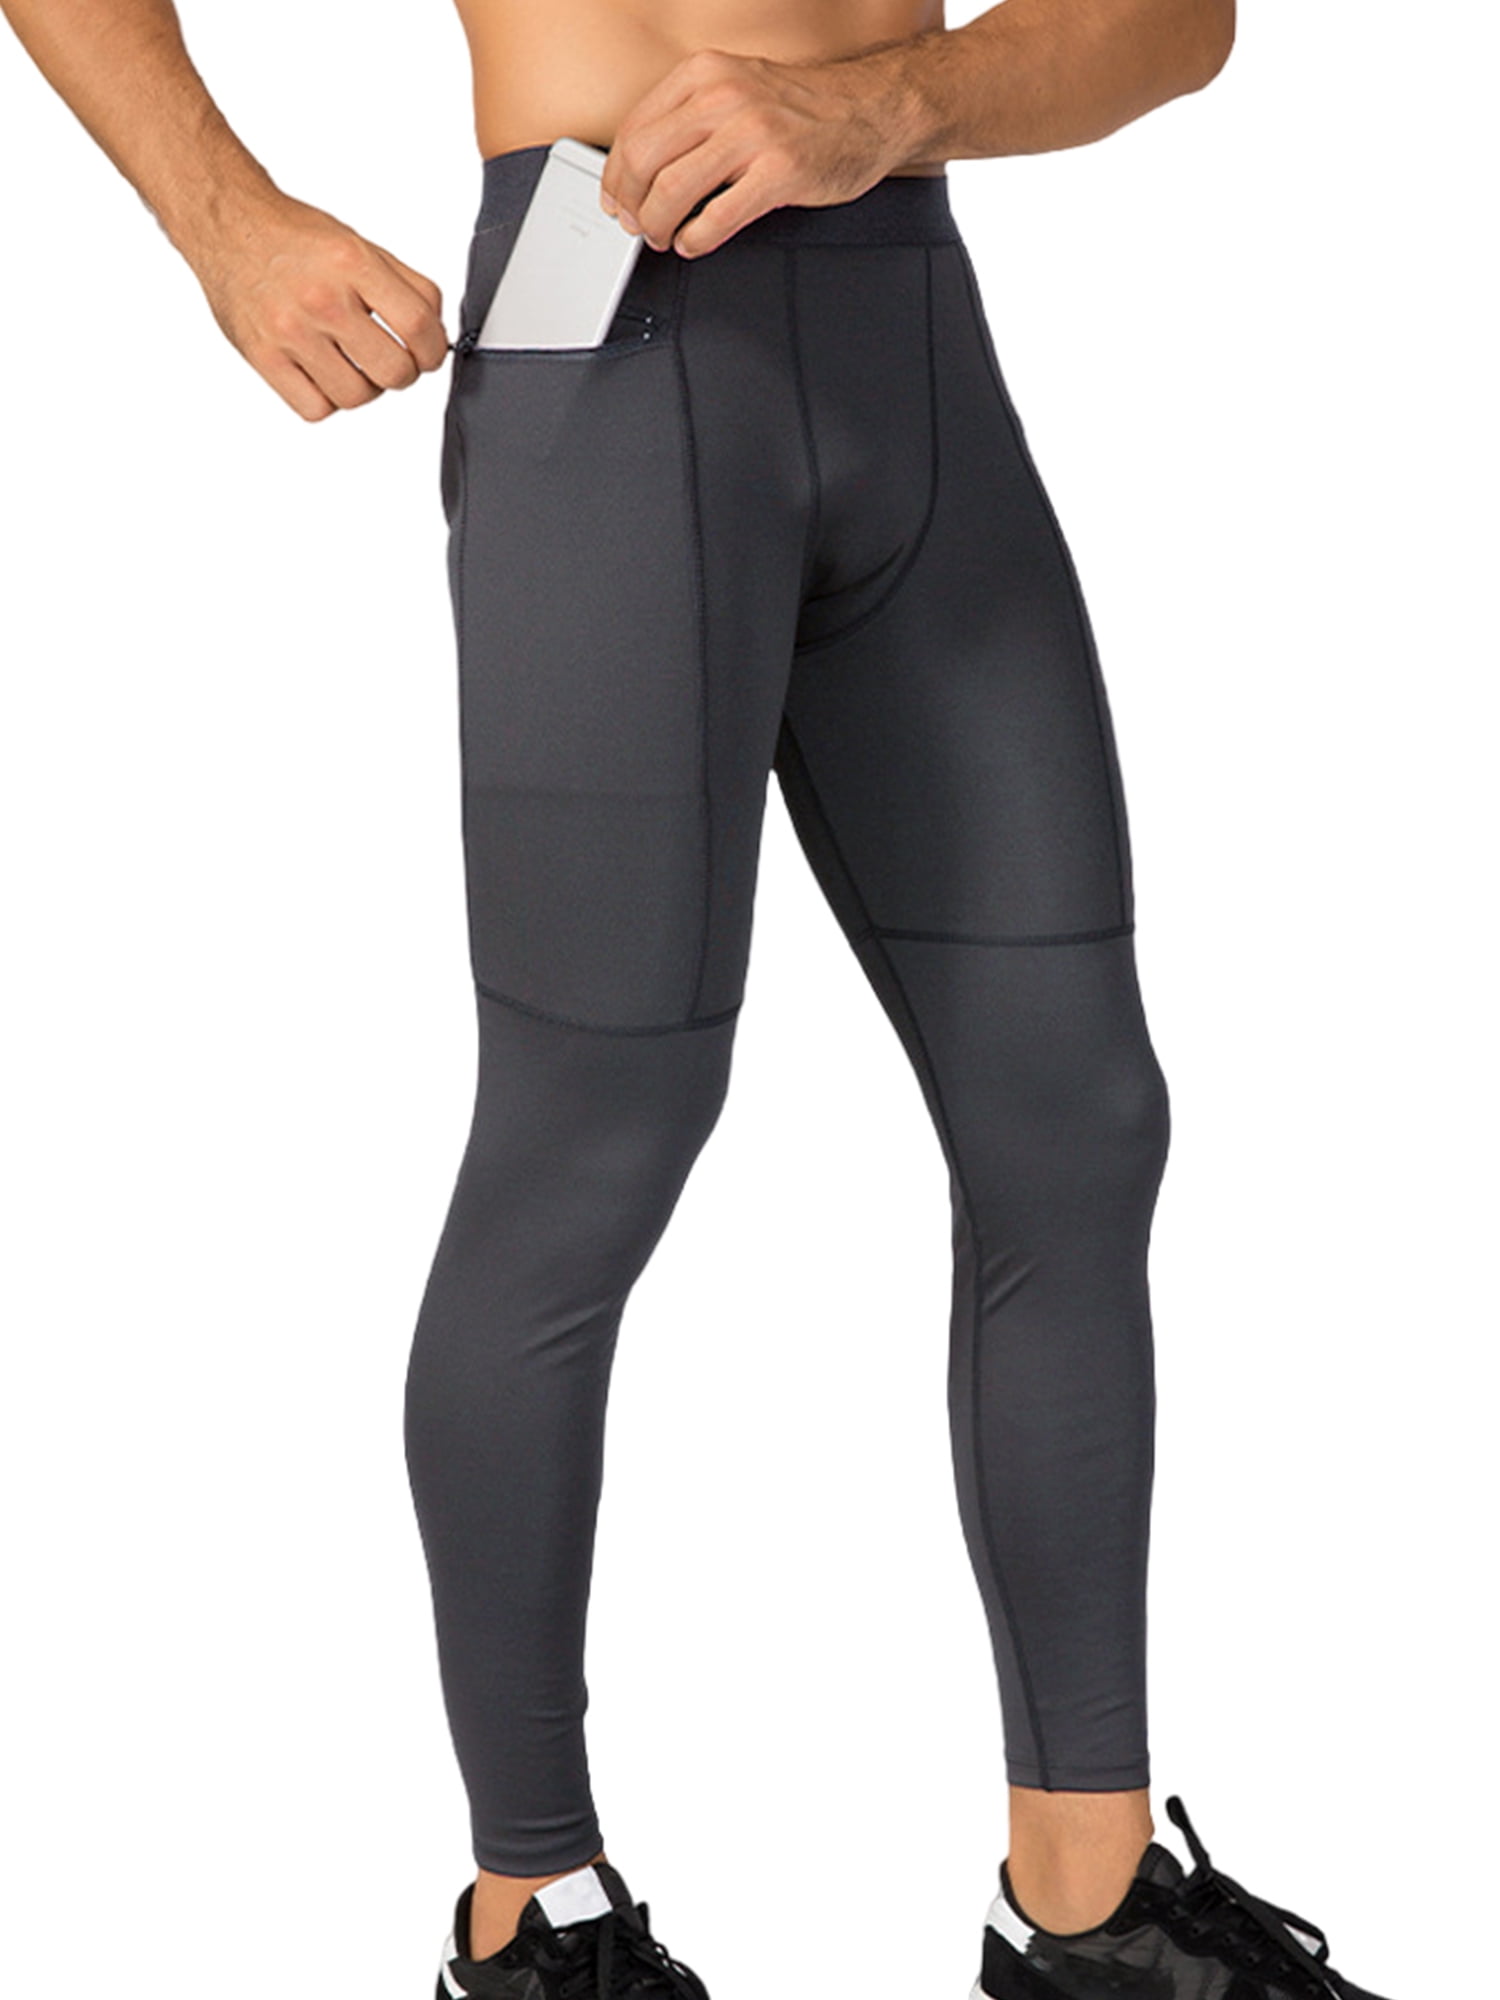 Frontwalk Mens Compression Pants High Waisted Leggings Cool Dry